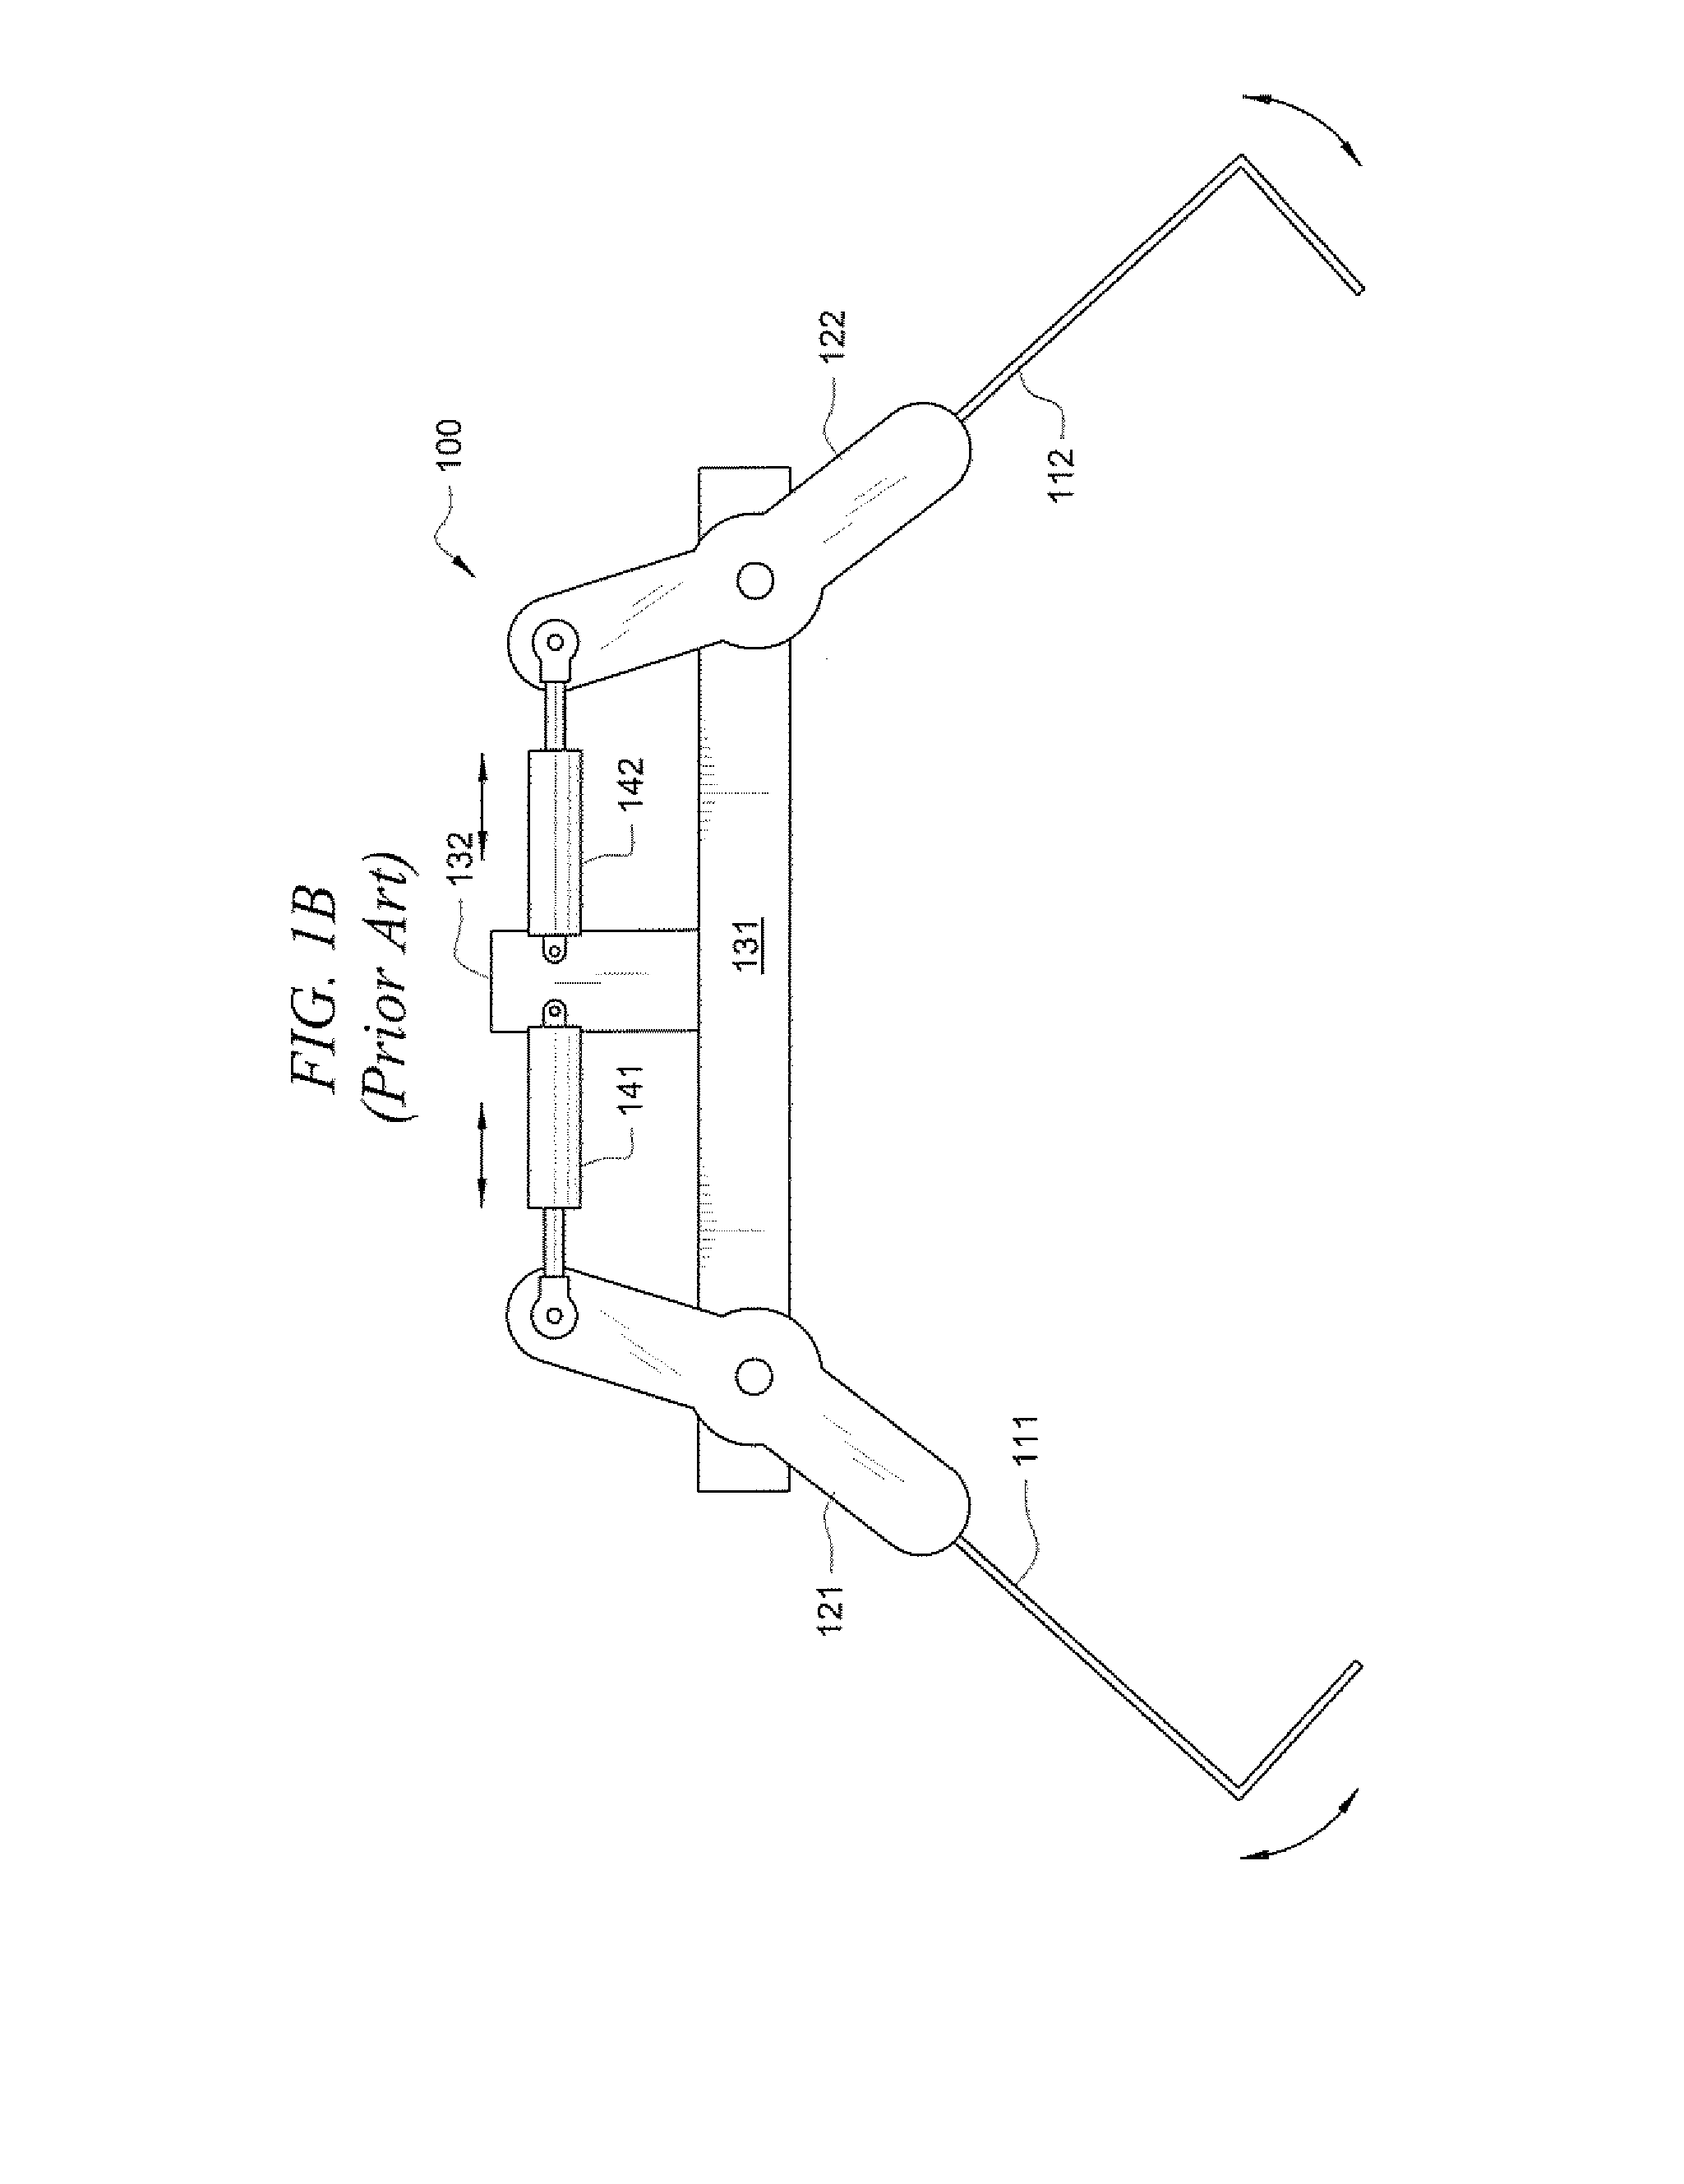 Adjustable tine clamp systems and methods